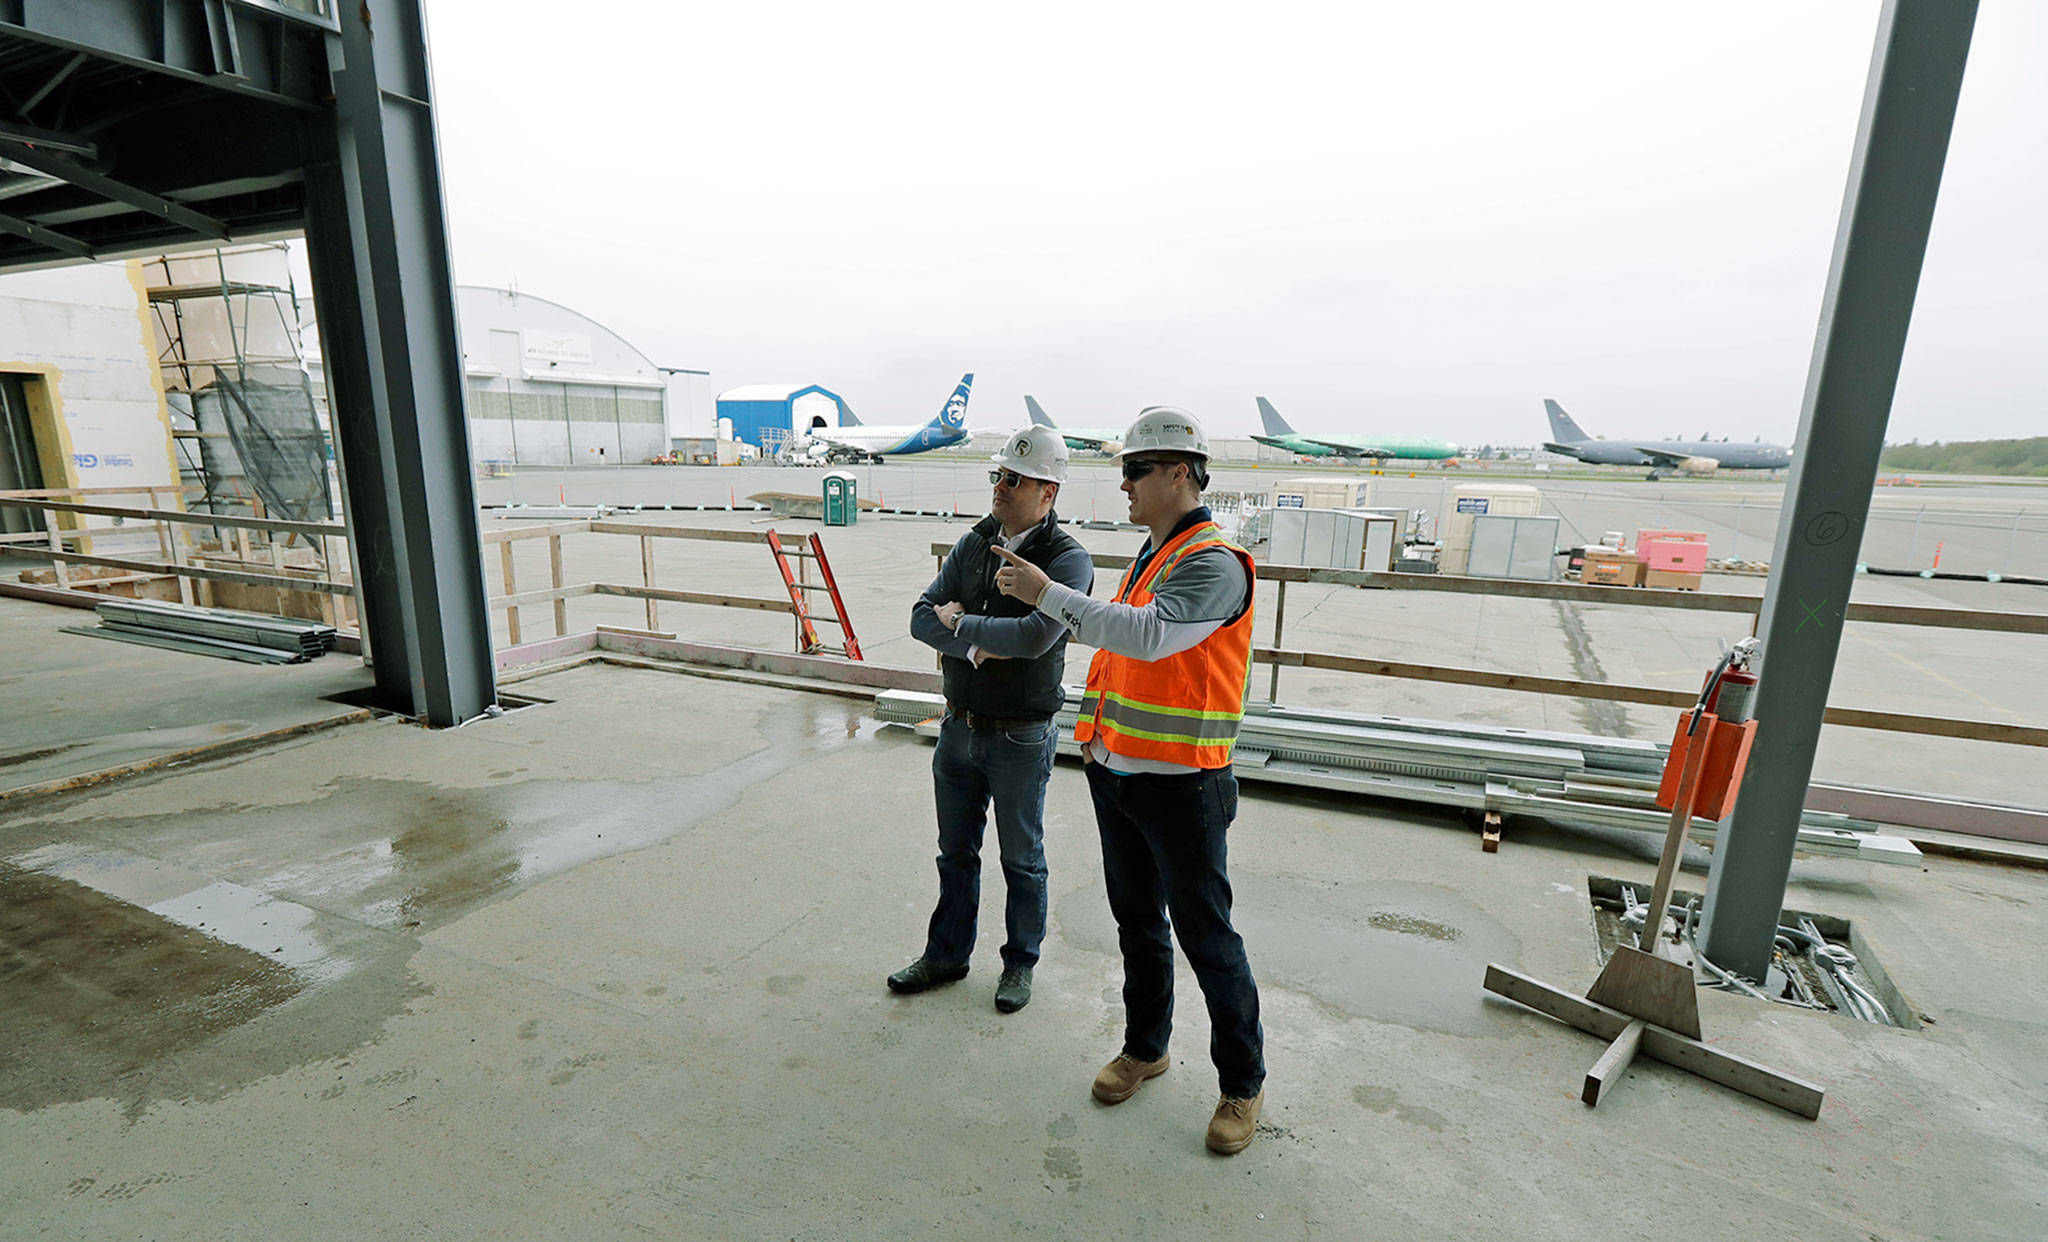 Brett Smith (left), CEO of Propeller Airports, talks with project engineer Todd Raynes inside the new passenger terminal at Paine Field in Everett. (AP Photo/Ted S. Warren)